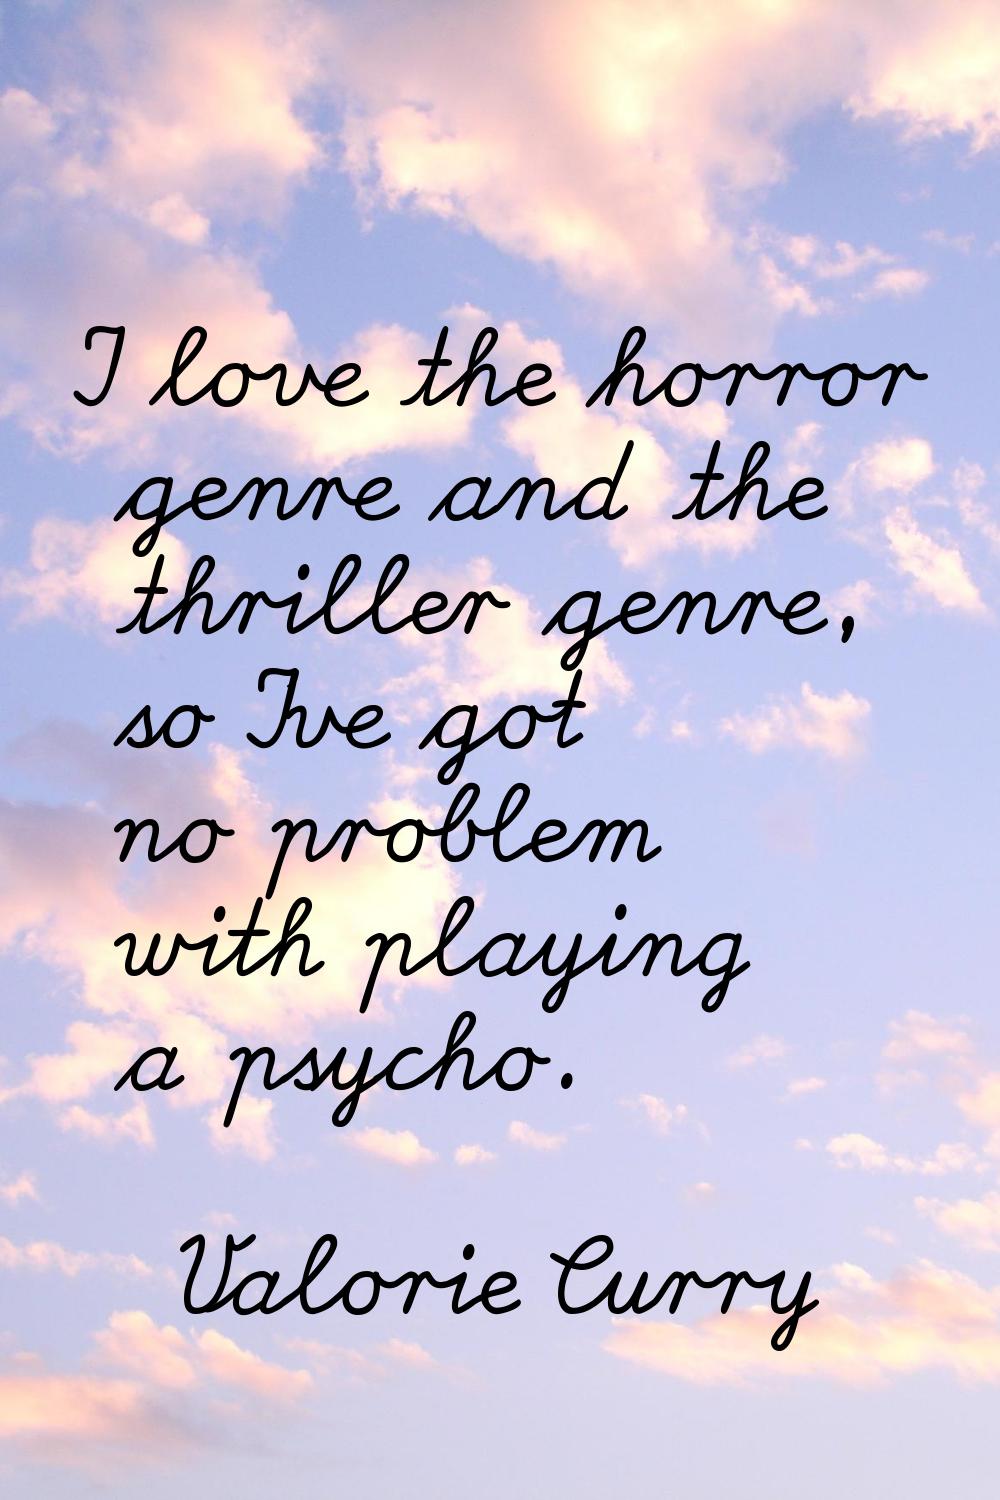 I love the horror genre and the thriller genre, so I've got no problem with playing a psycho.